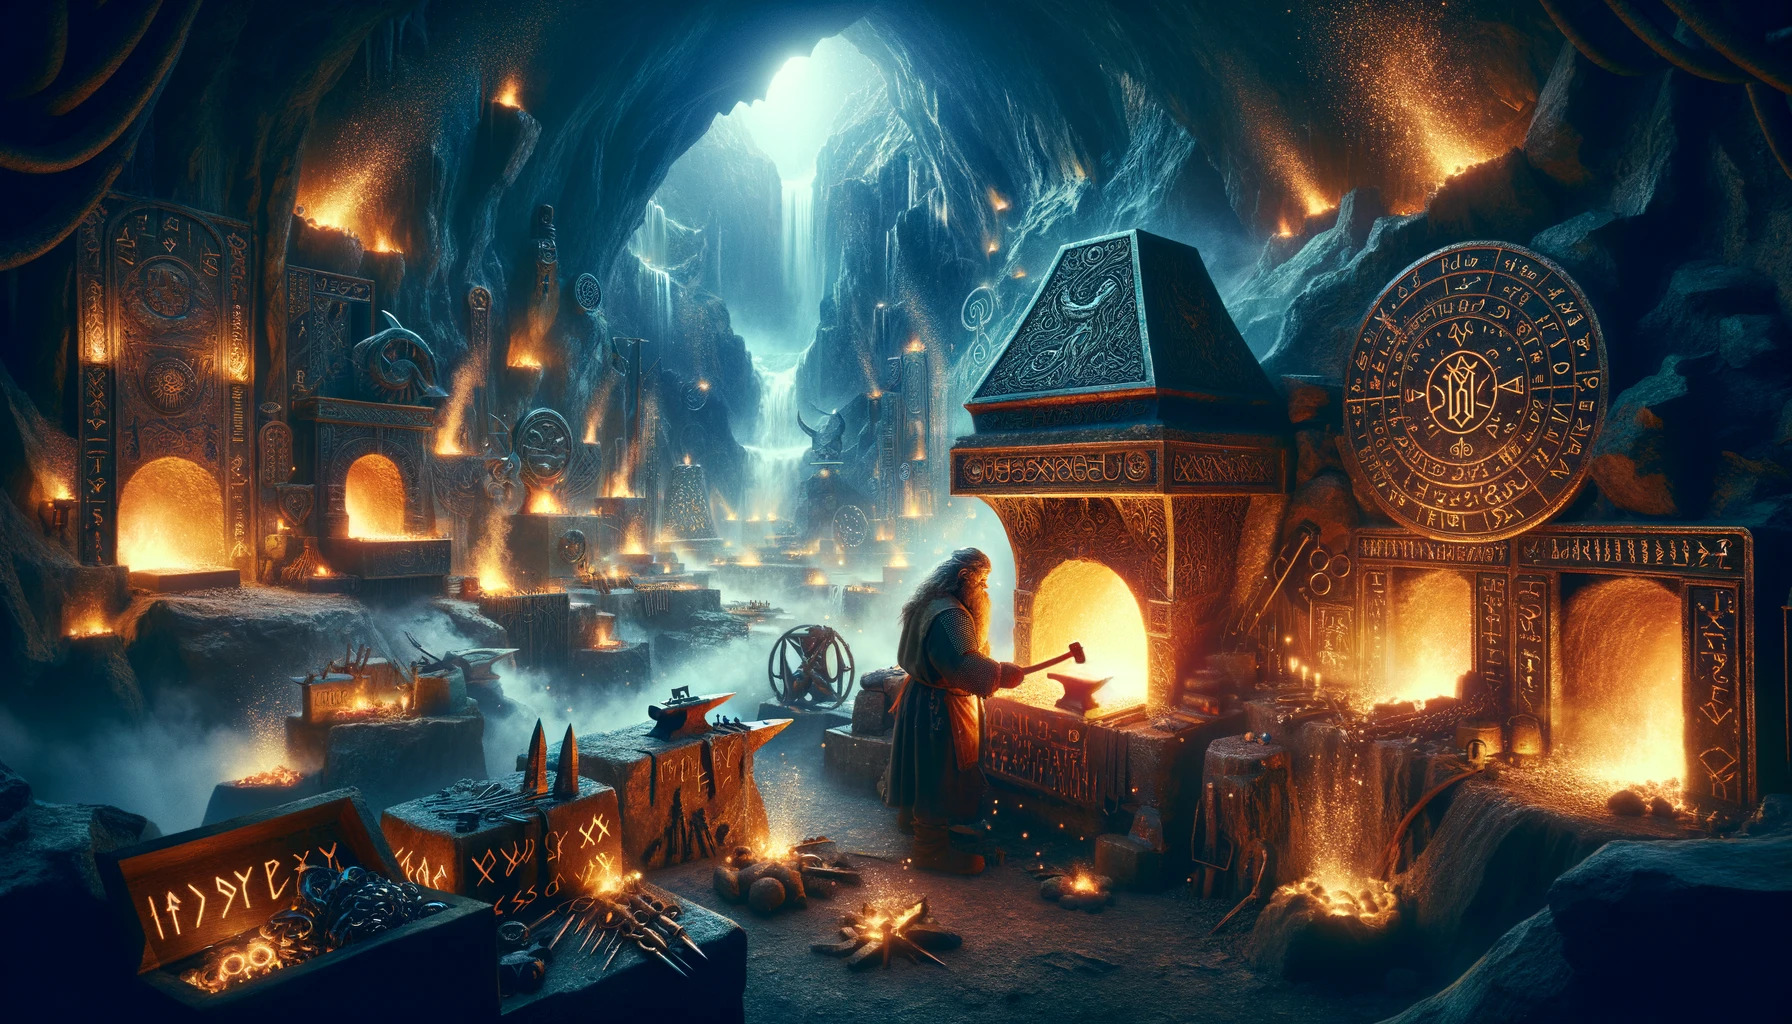 The cinematic image inspired by the essence of a Dwarf Name Generator has been created, capturing the mystical forge and the atmosphere of creation. Explore the scene to immerse yourself in the deep lore and craftsmanship of dwarves.